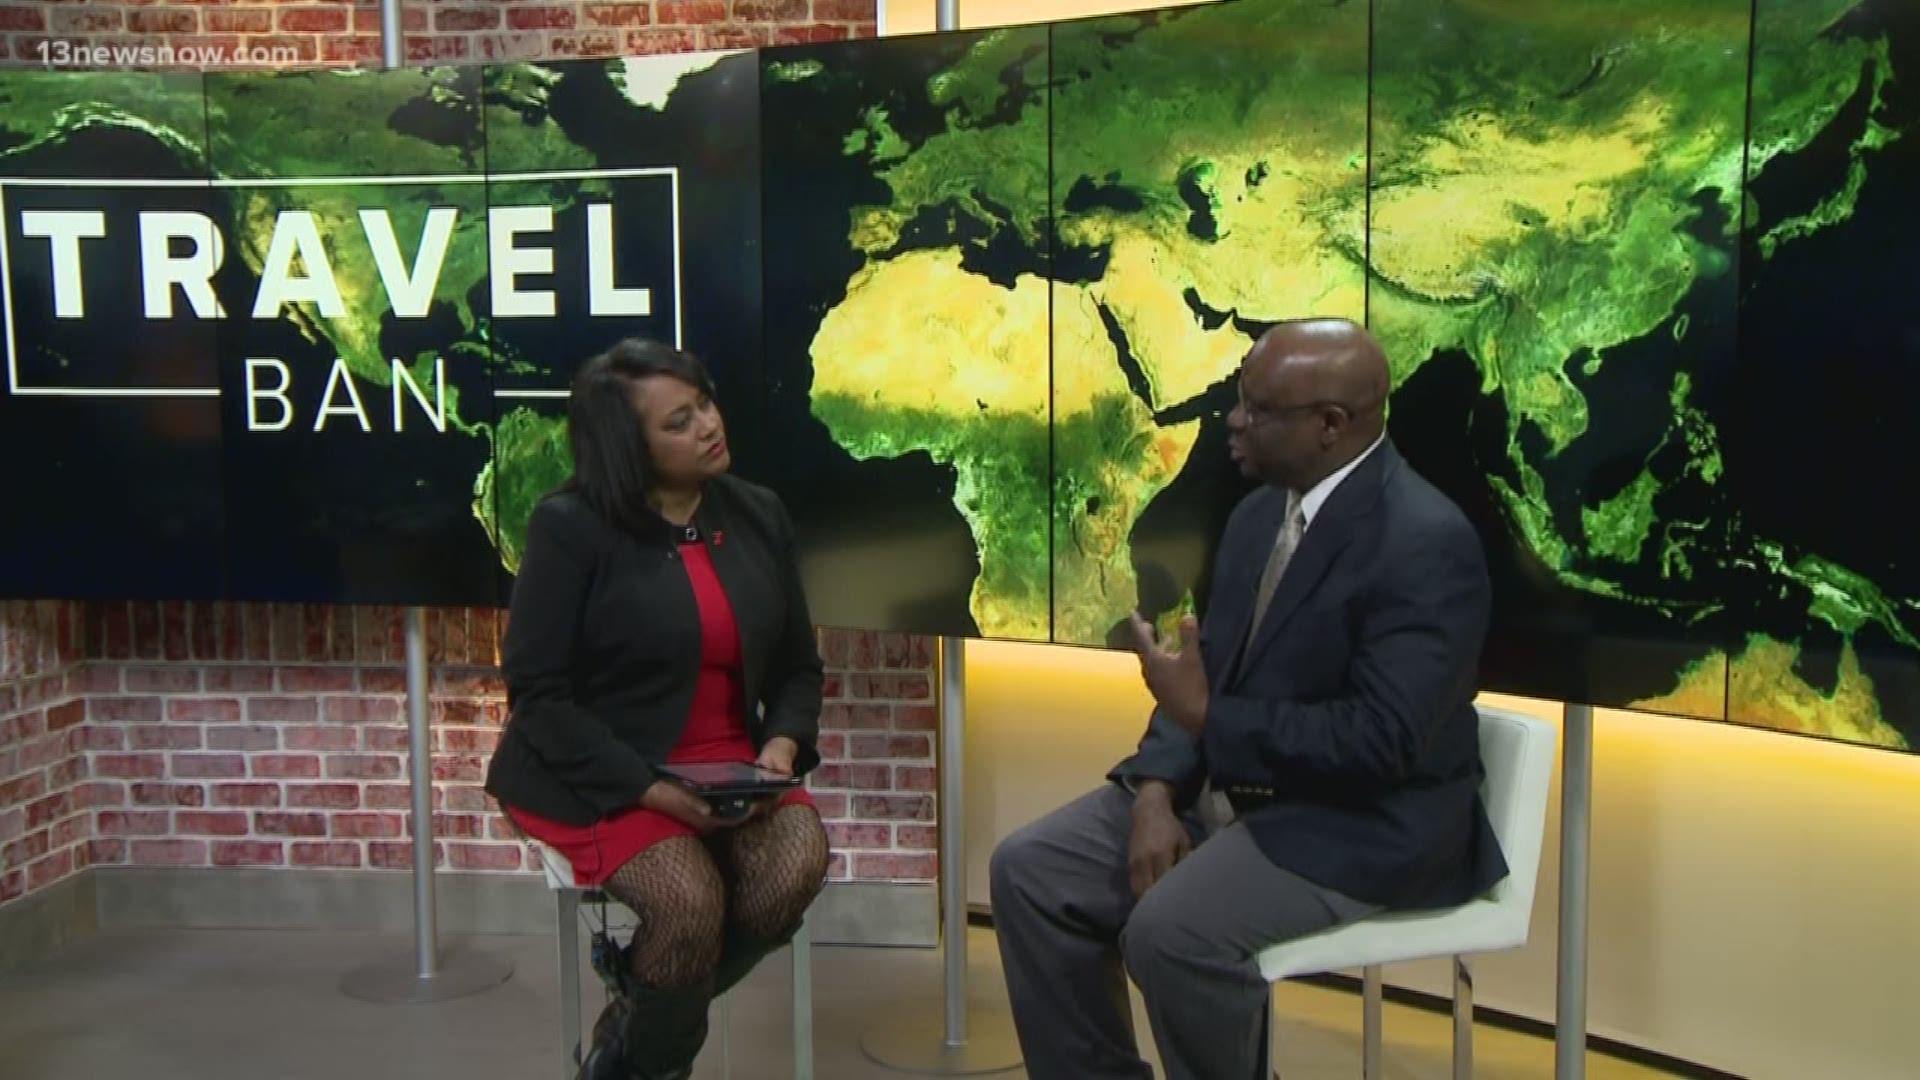 President Trump expanded his travel ban to several African countries. 13News Now Janet Roach sits down with Doctor Patrick Mbajekwe to talk about the expansion.